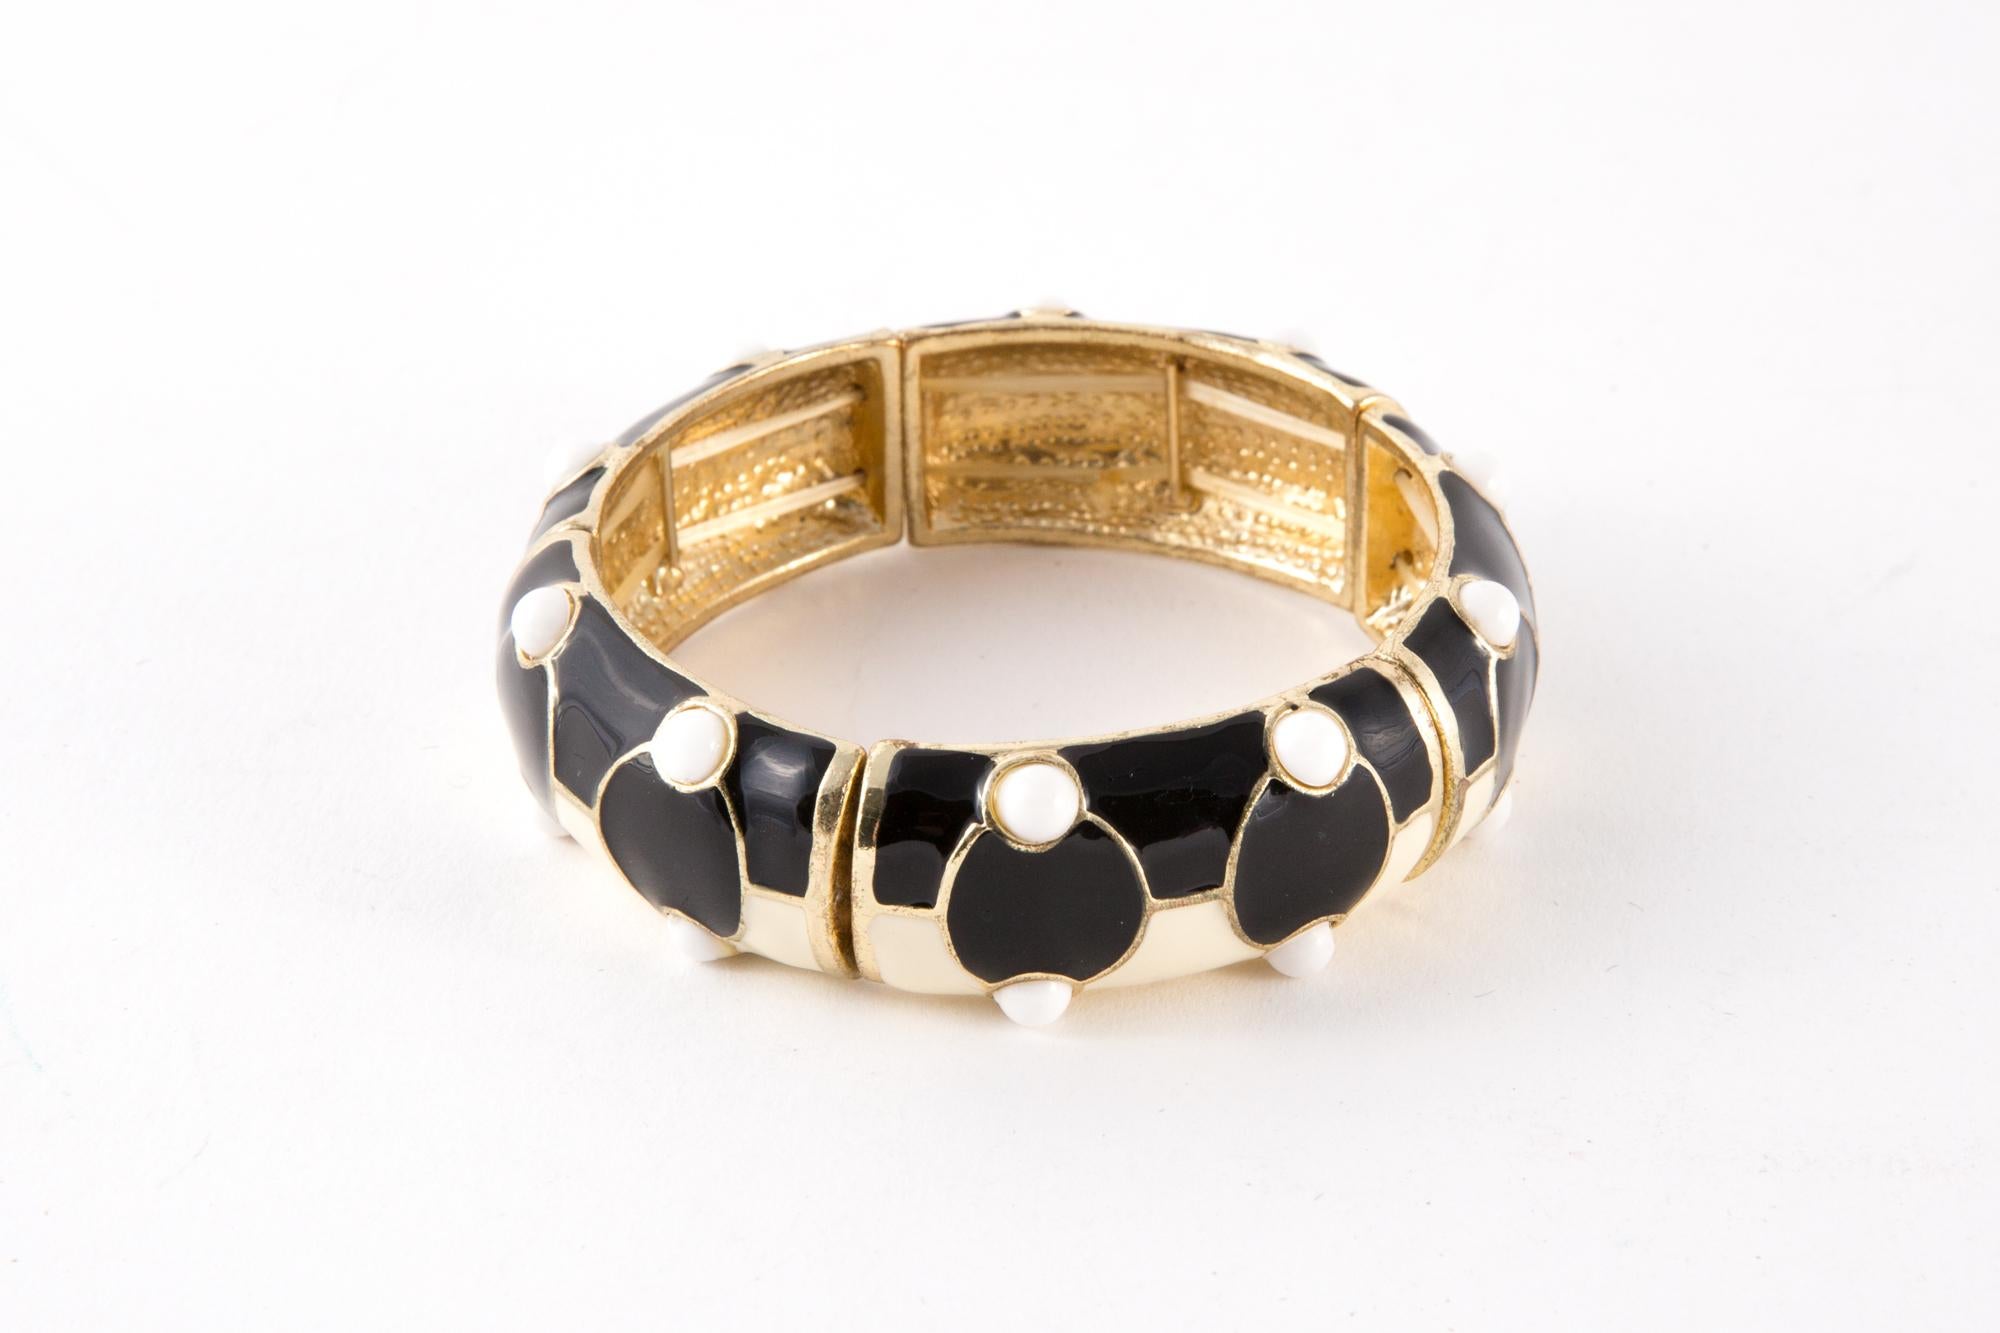 1980s Art Deco style bracelet featuring black & ivory enamel motives, an elastic inside to fit inside the bracelet.
In good vintage condition.  Made in France.
We guarantee you will receive this gorgeous item as described and showed on